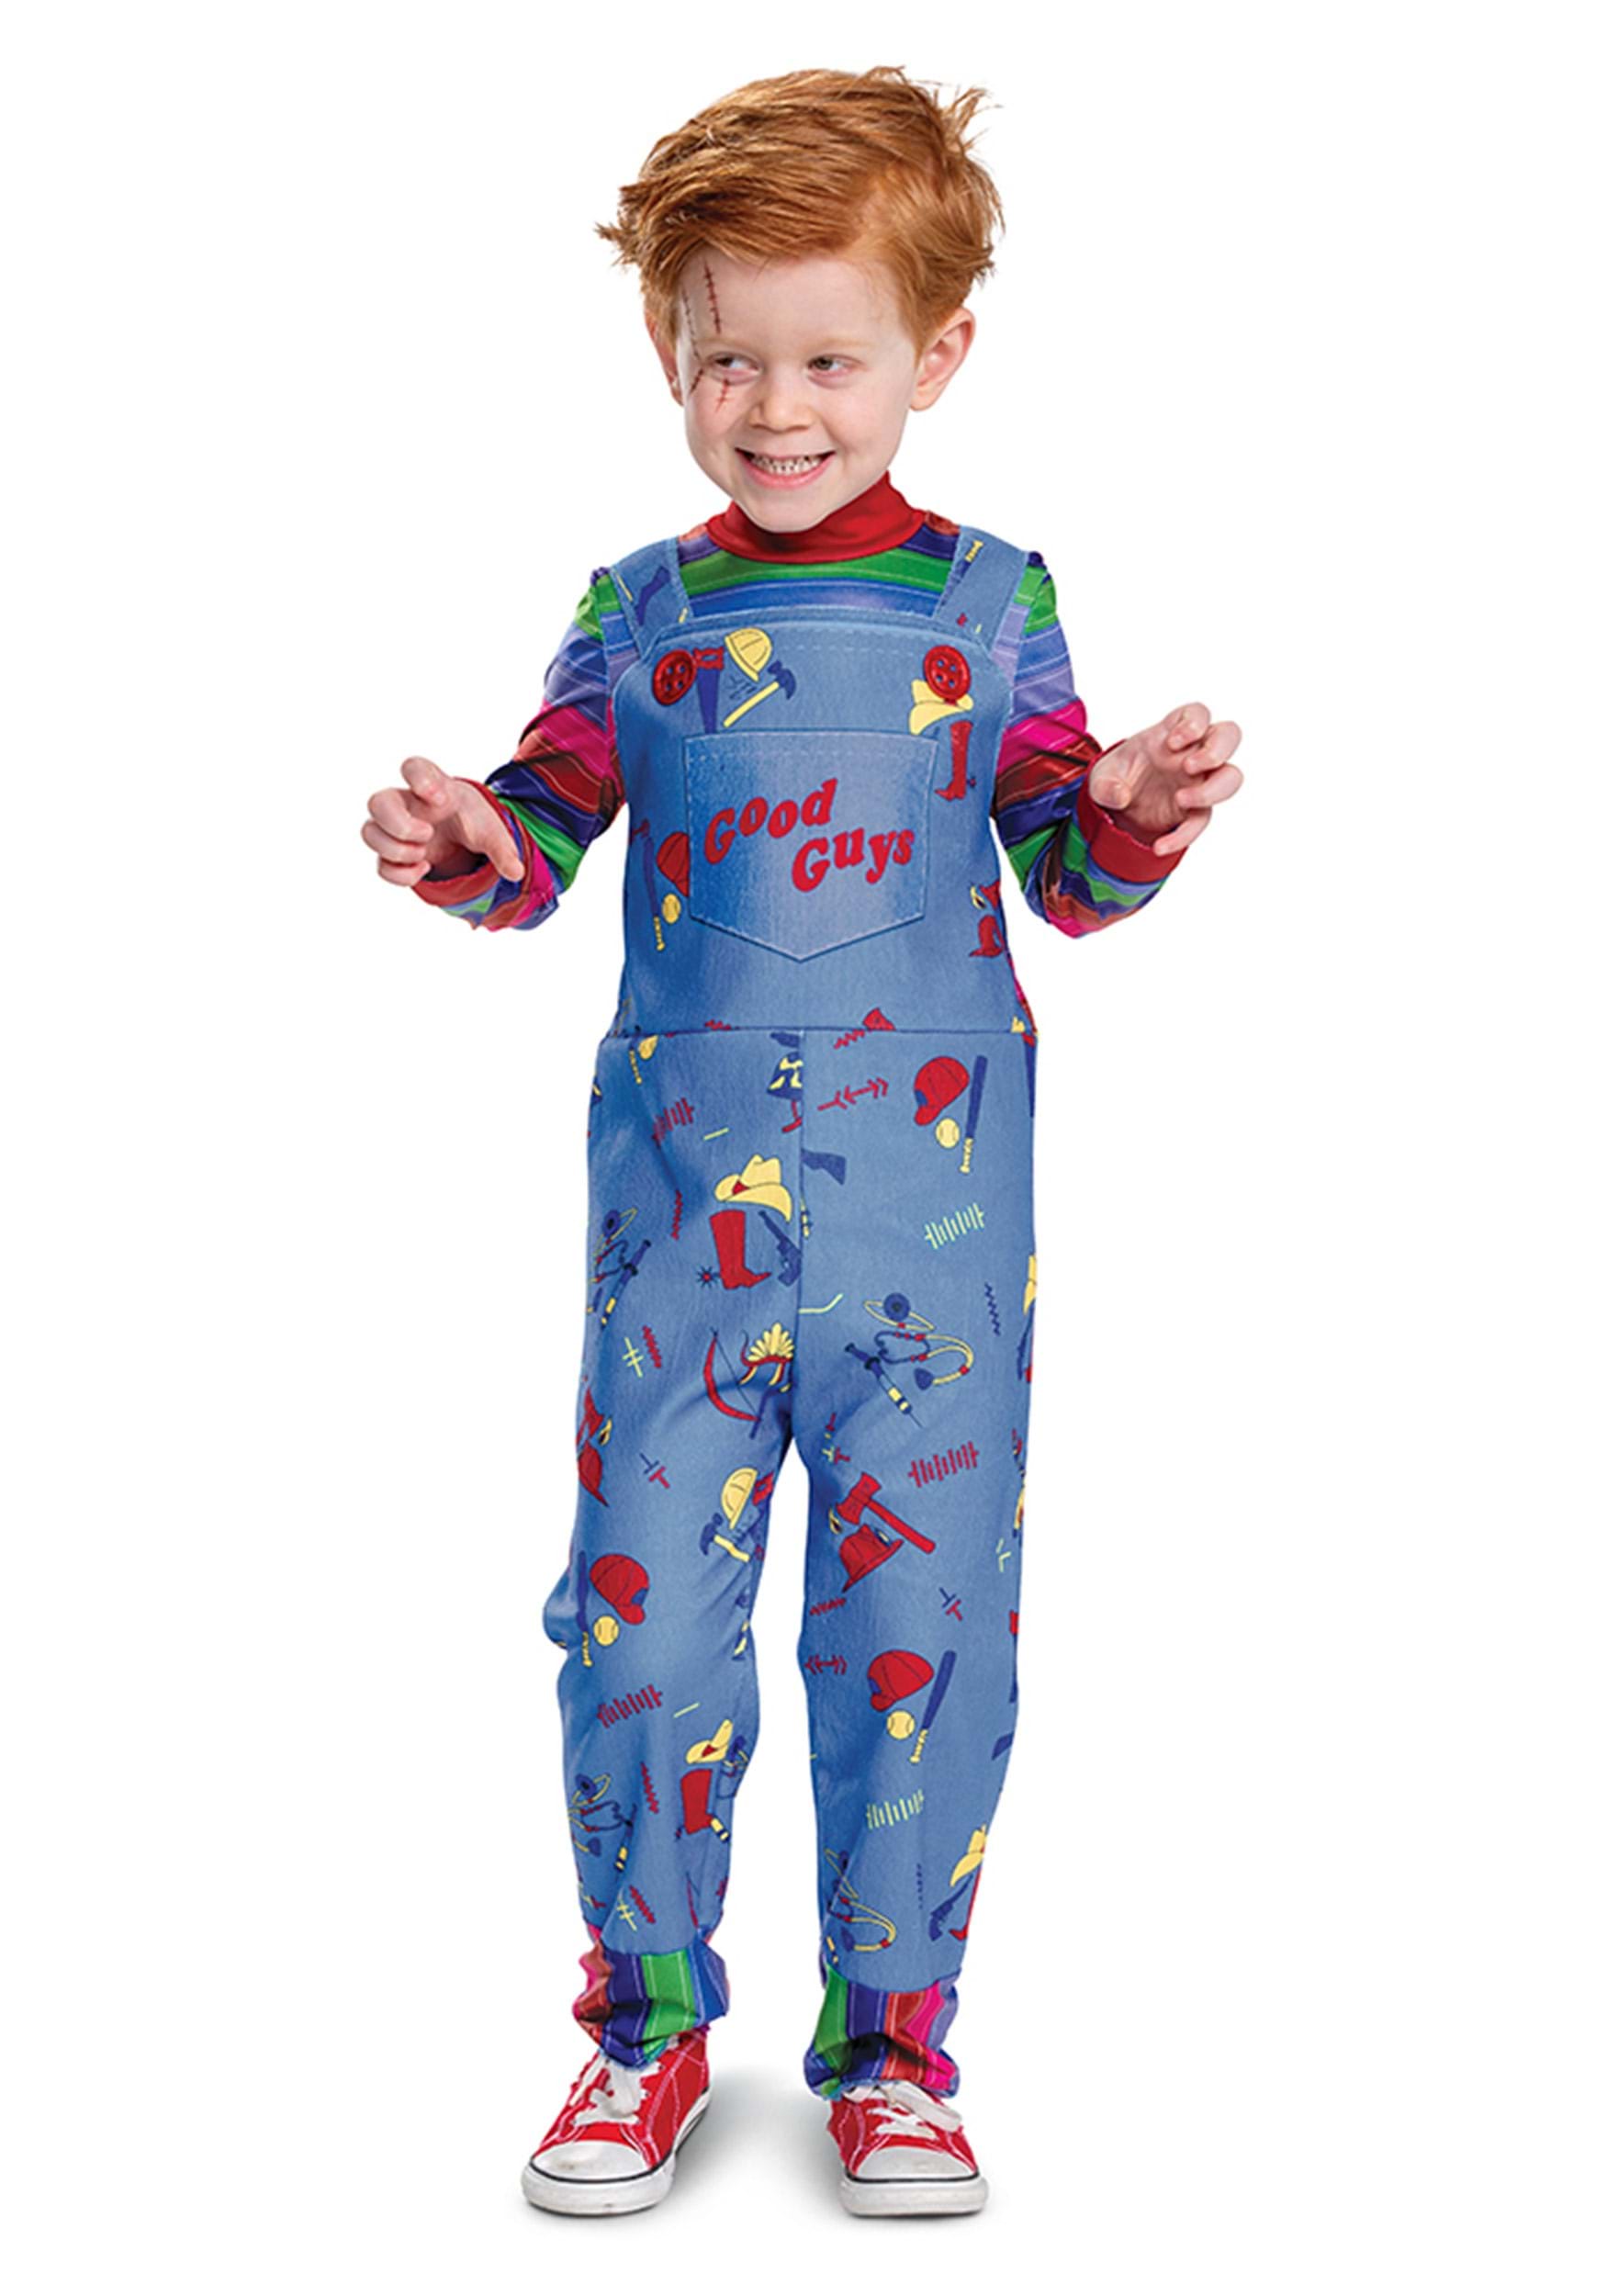 Toddler Childs Play Chucky Costume